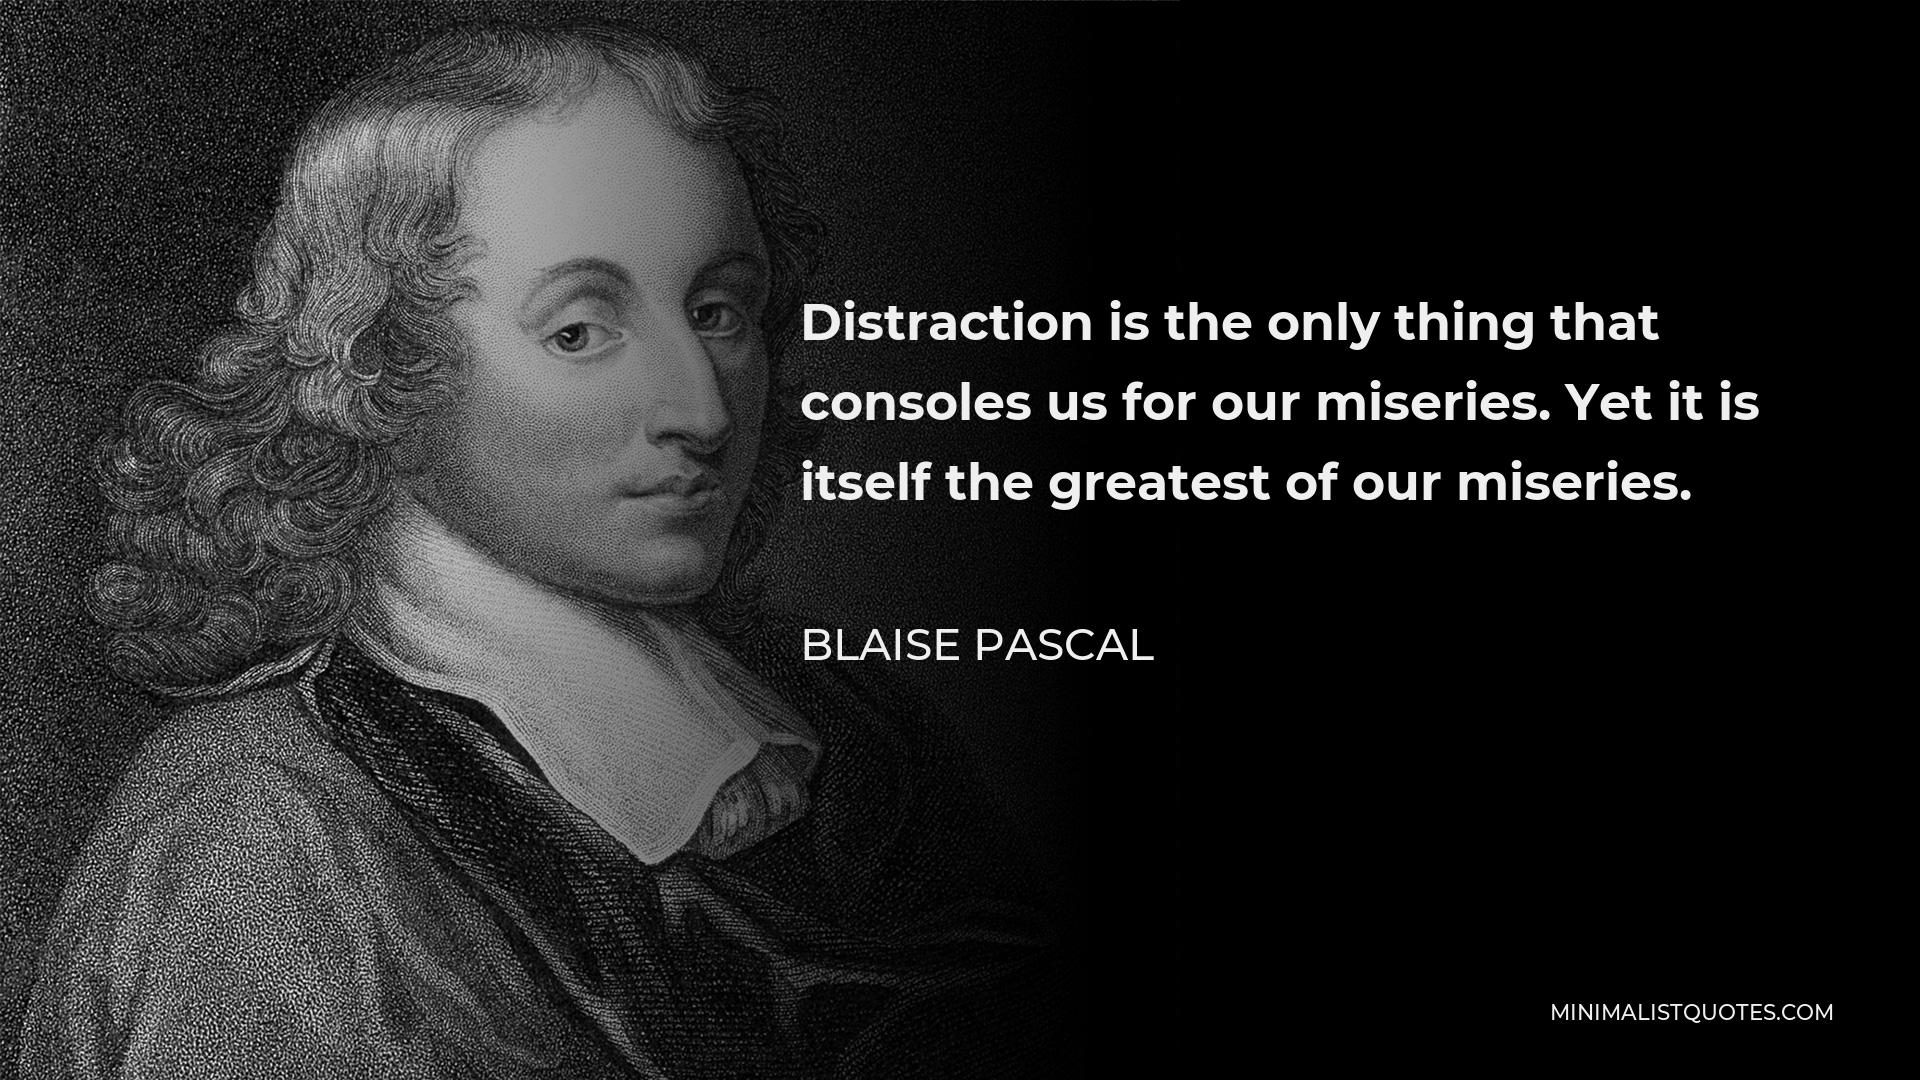 Blaise Pascal Quote - Distraction is the only thing that consoles us for our miseries. Yet it is itself the greatest of our miseries.